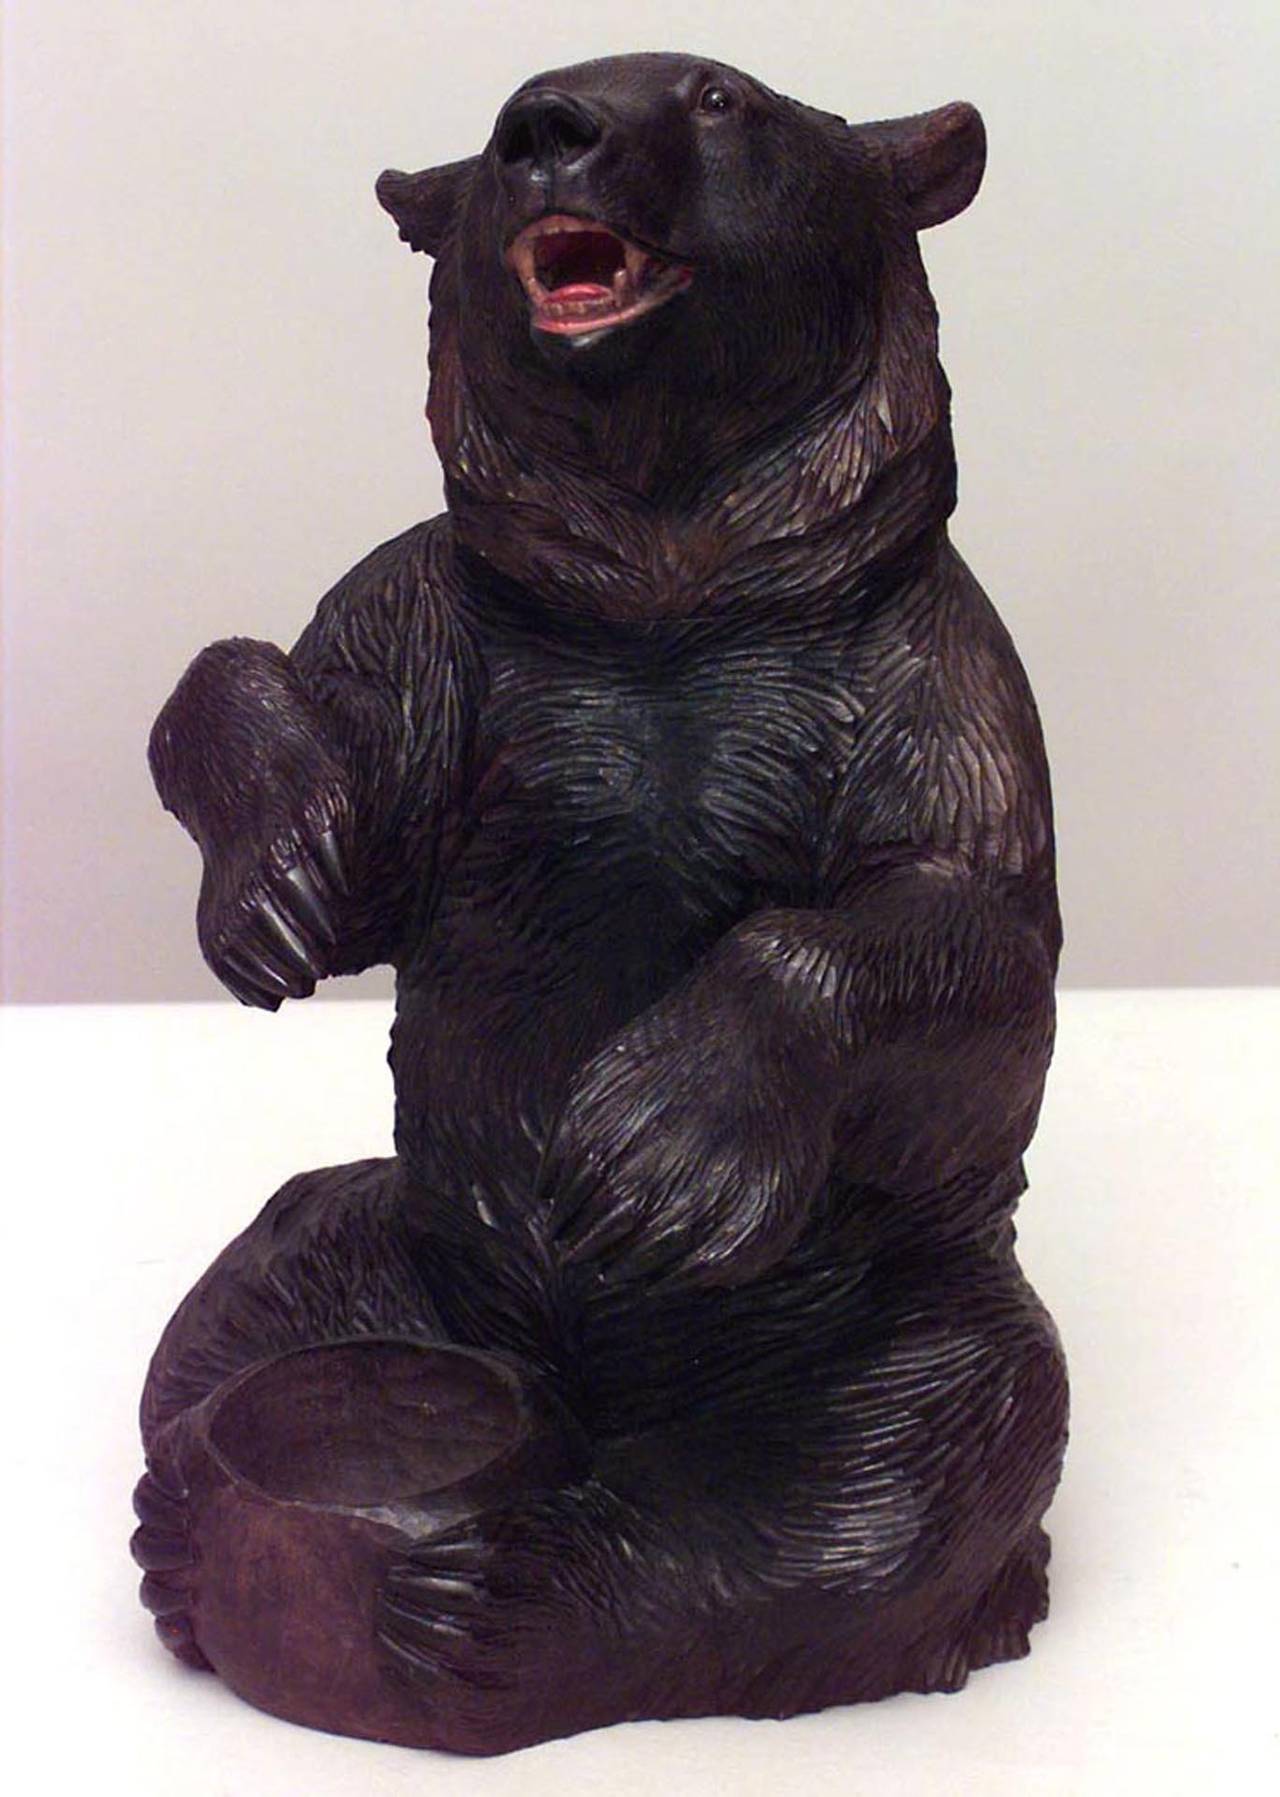 Rustic Black Forest (19th Cent) carved walnut seated bear figure with hinged head and ashtray
